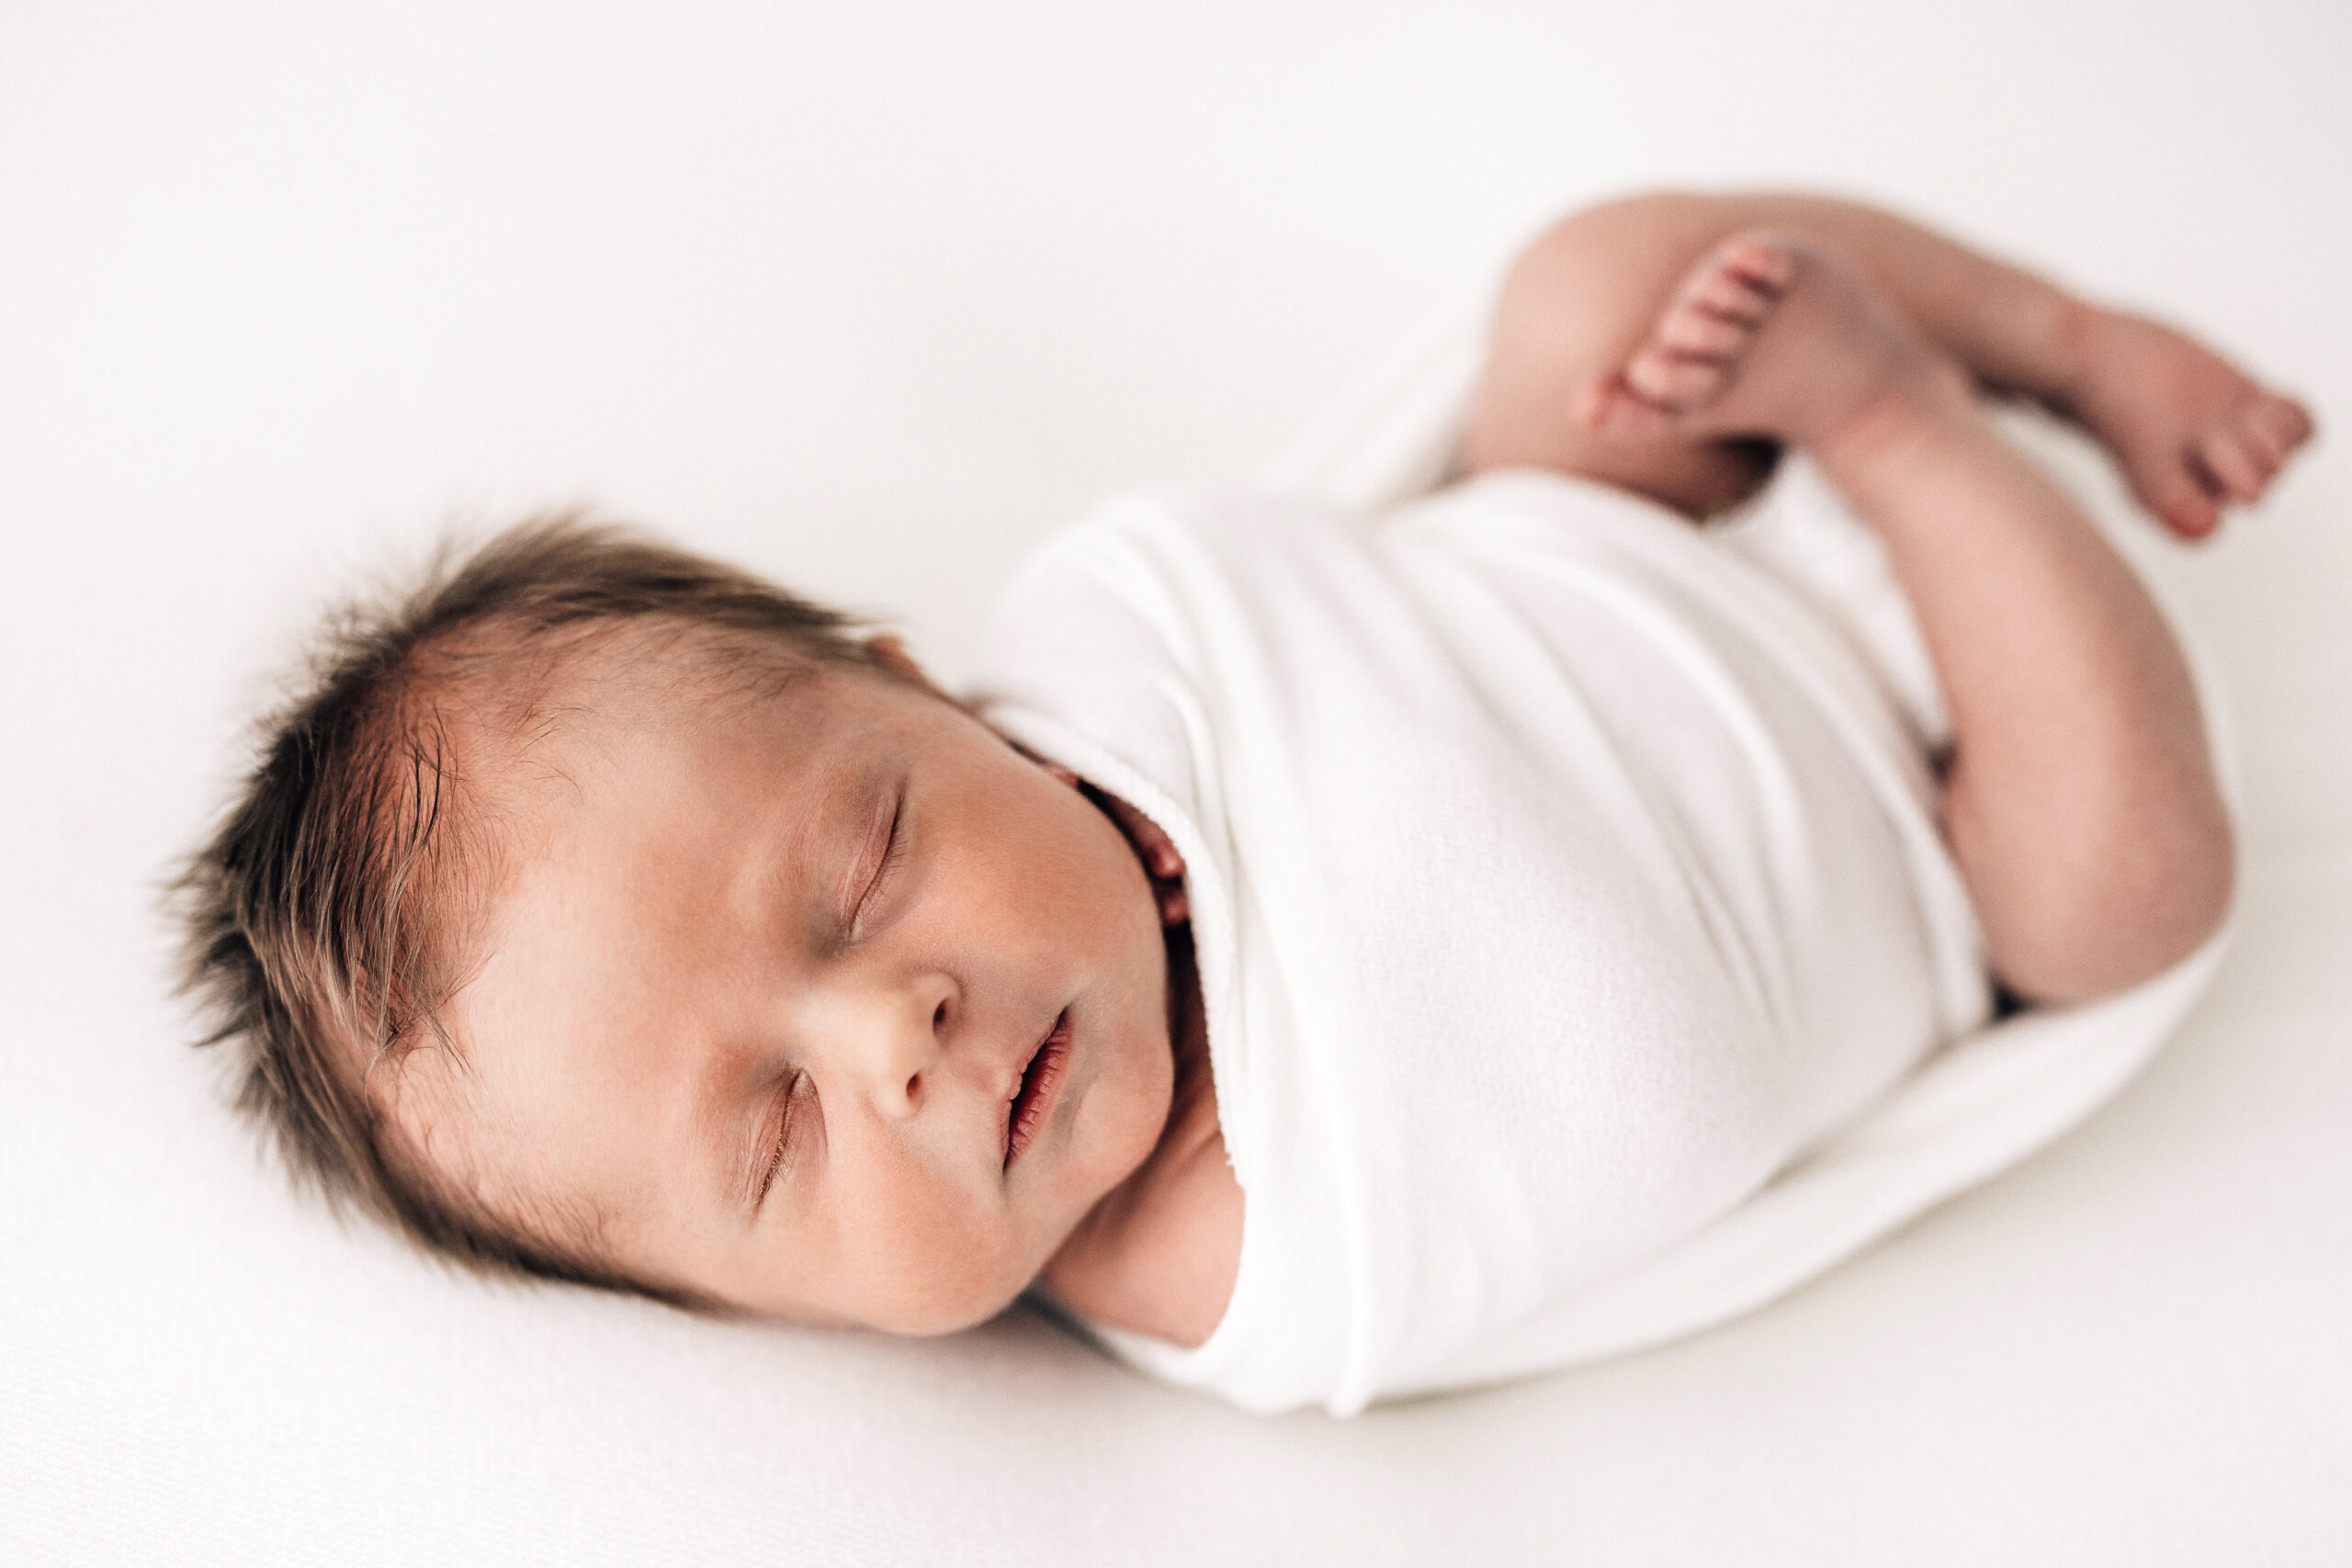 Newborn Sleeping on a white cloth and swaddled for newborn photos